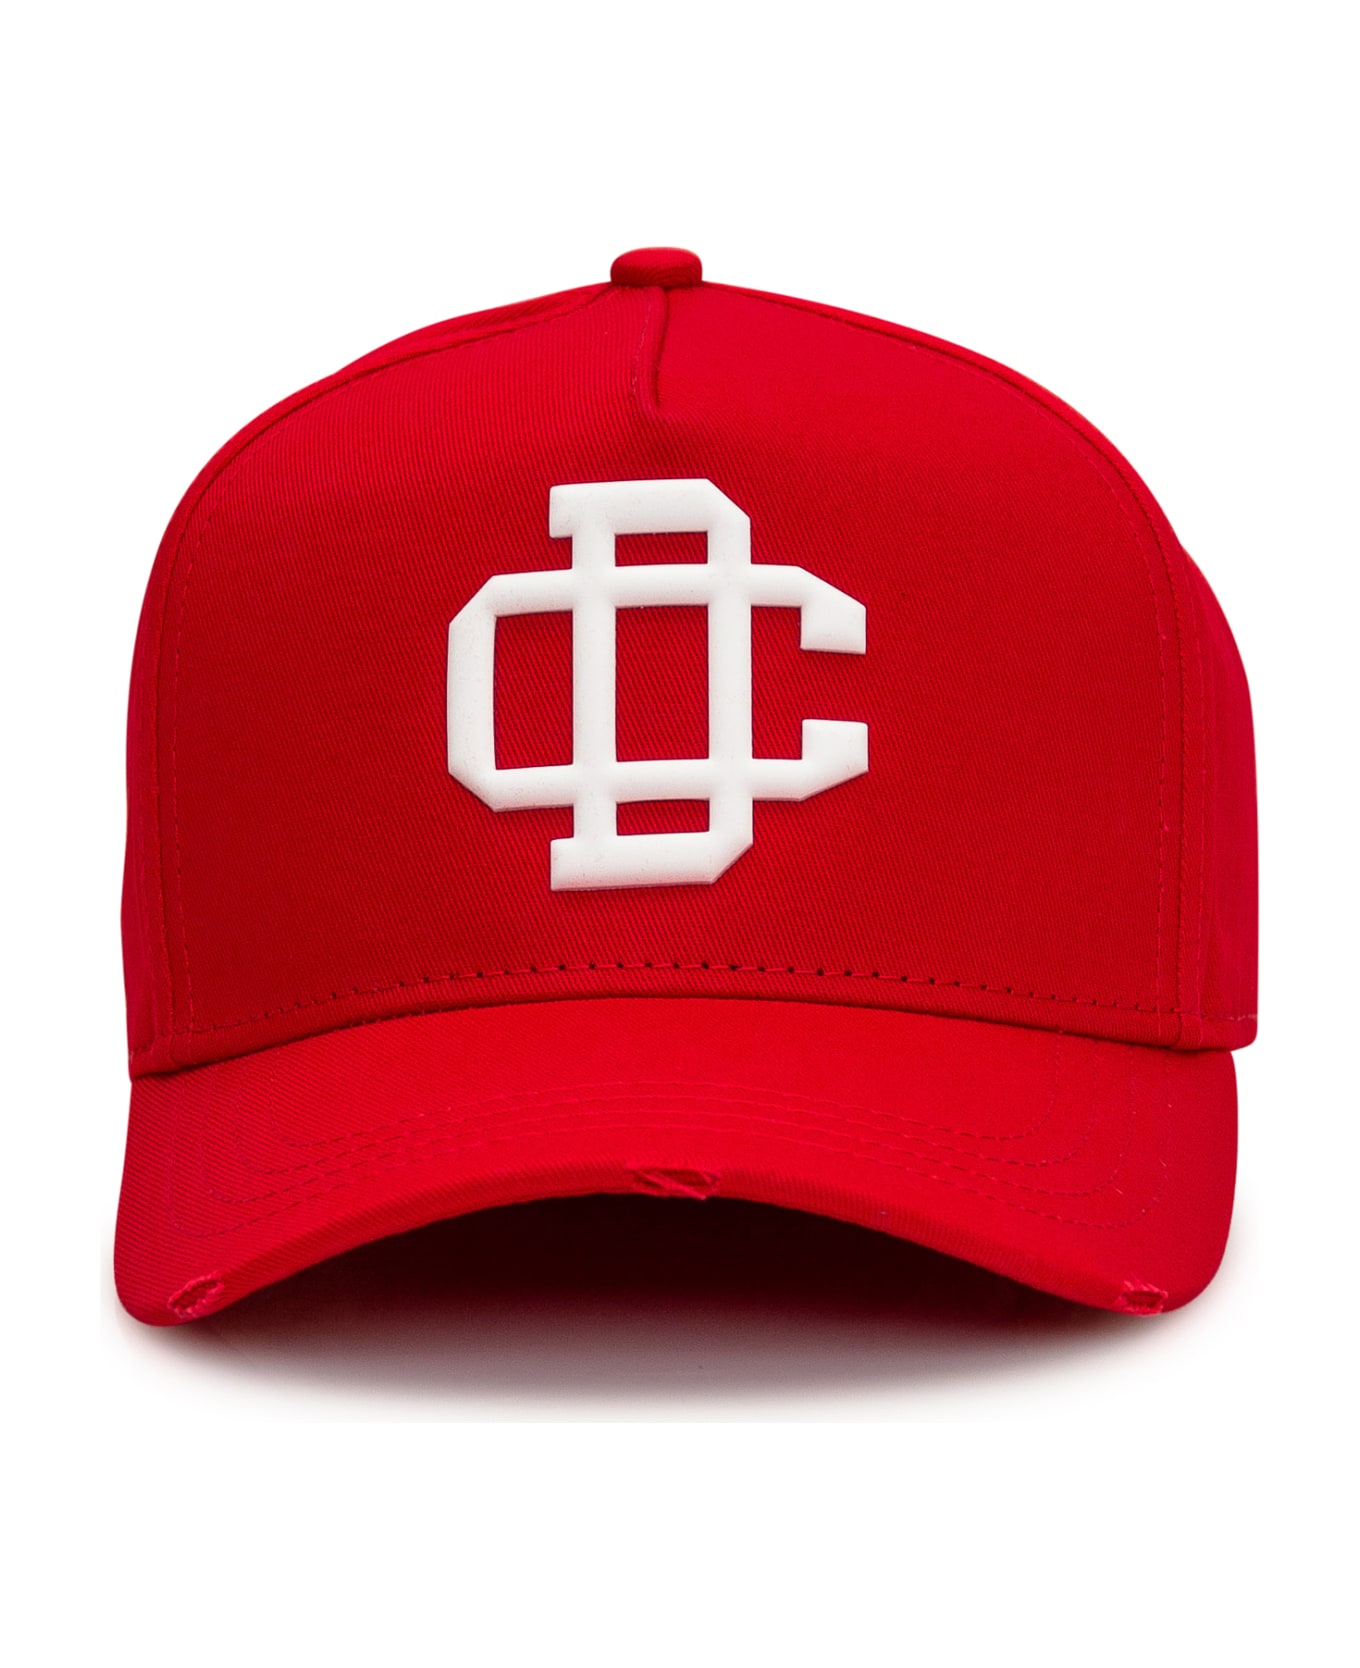 Dsquared2 Baseball Cap With Patch - ROSSO BIANCO